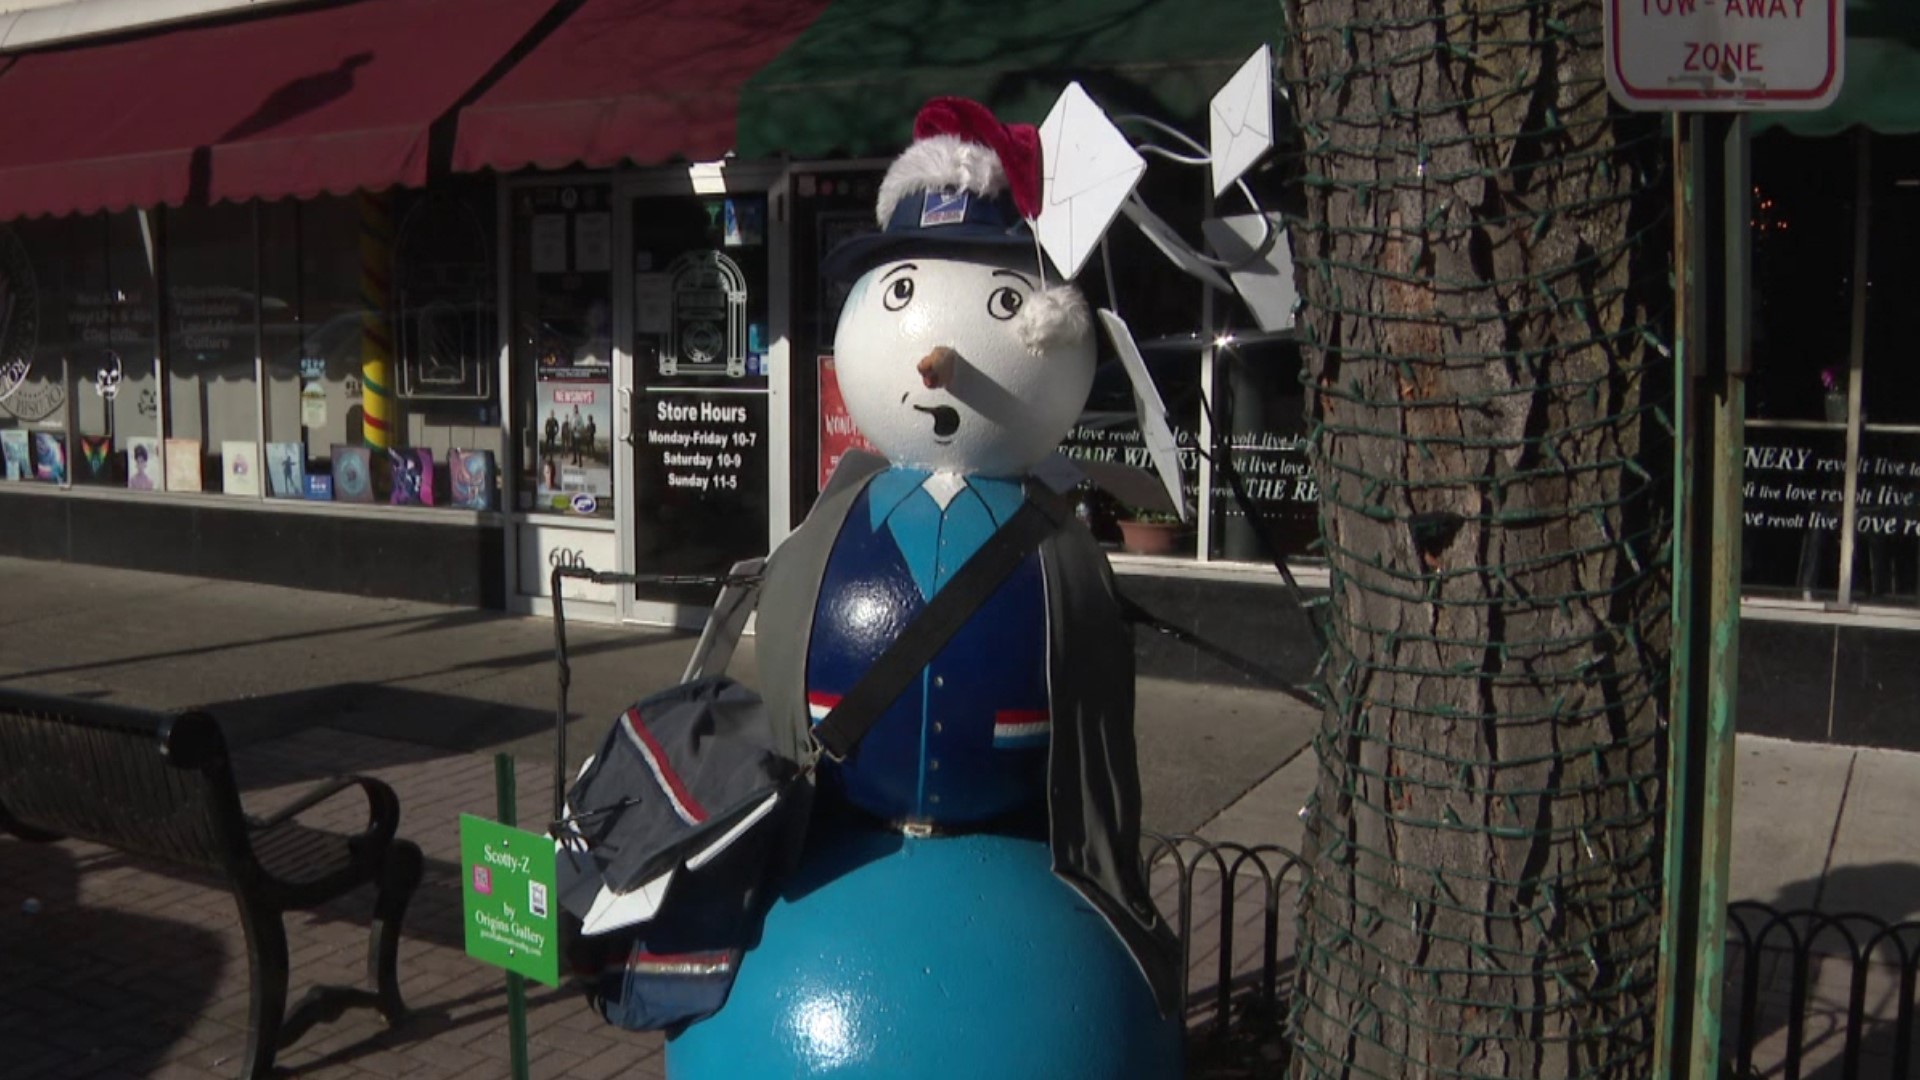 Some favorite holiday displays have returned to the streets in Downtown Stroudsburg.